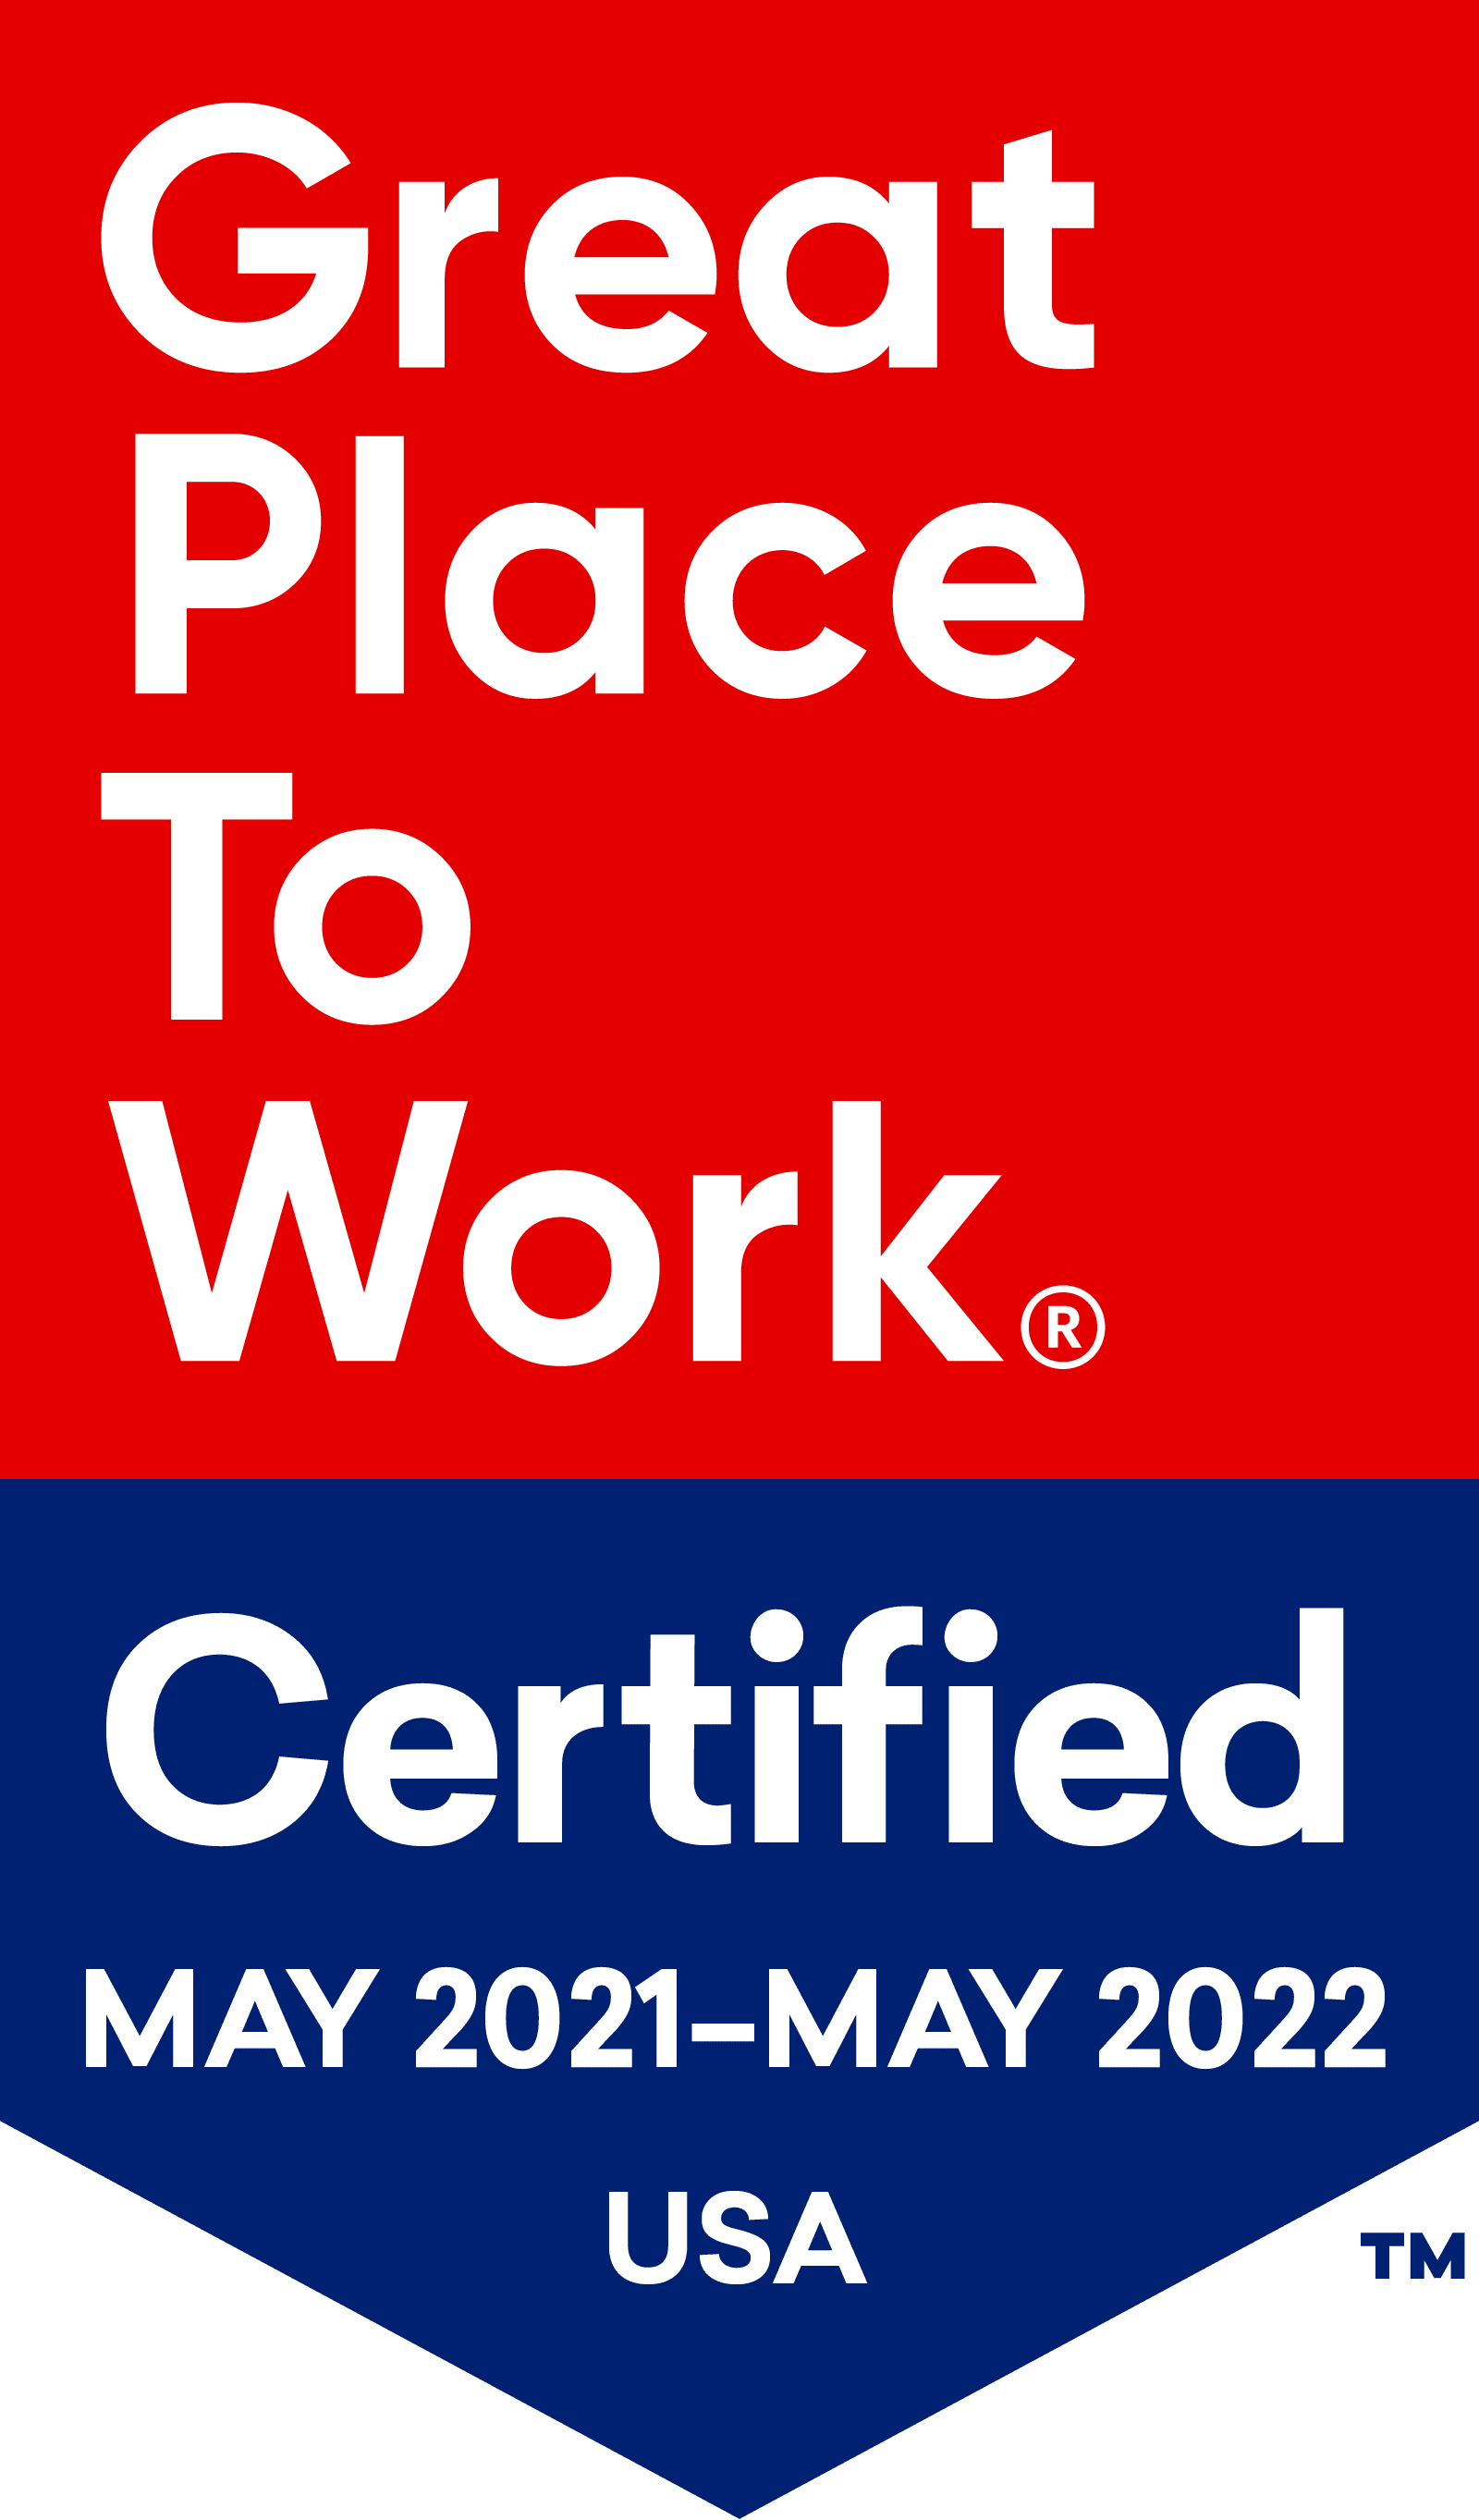 Sky Ridge is Great Place To Work Certified